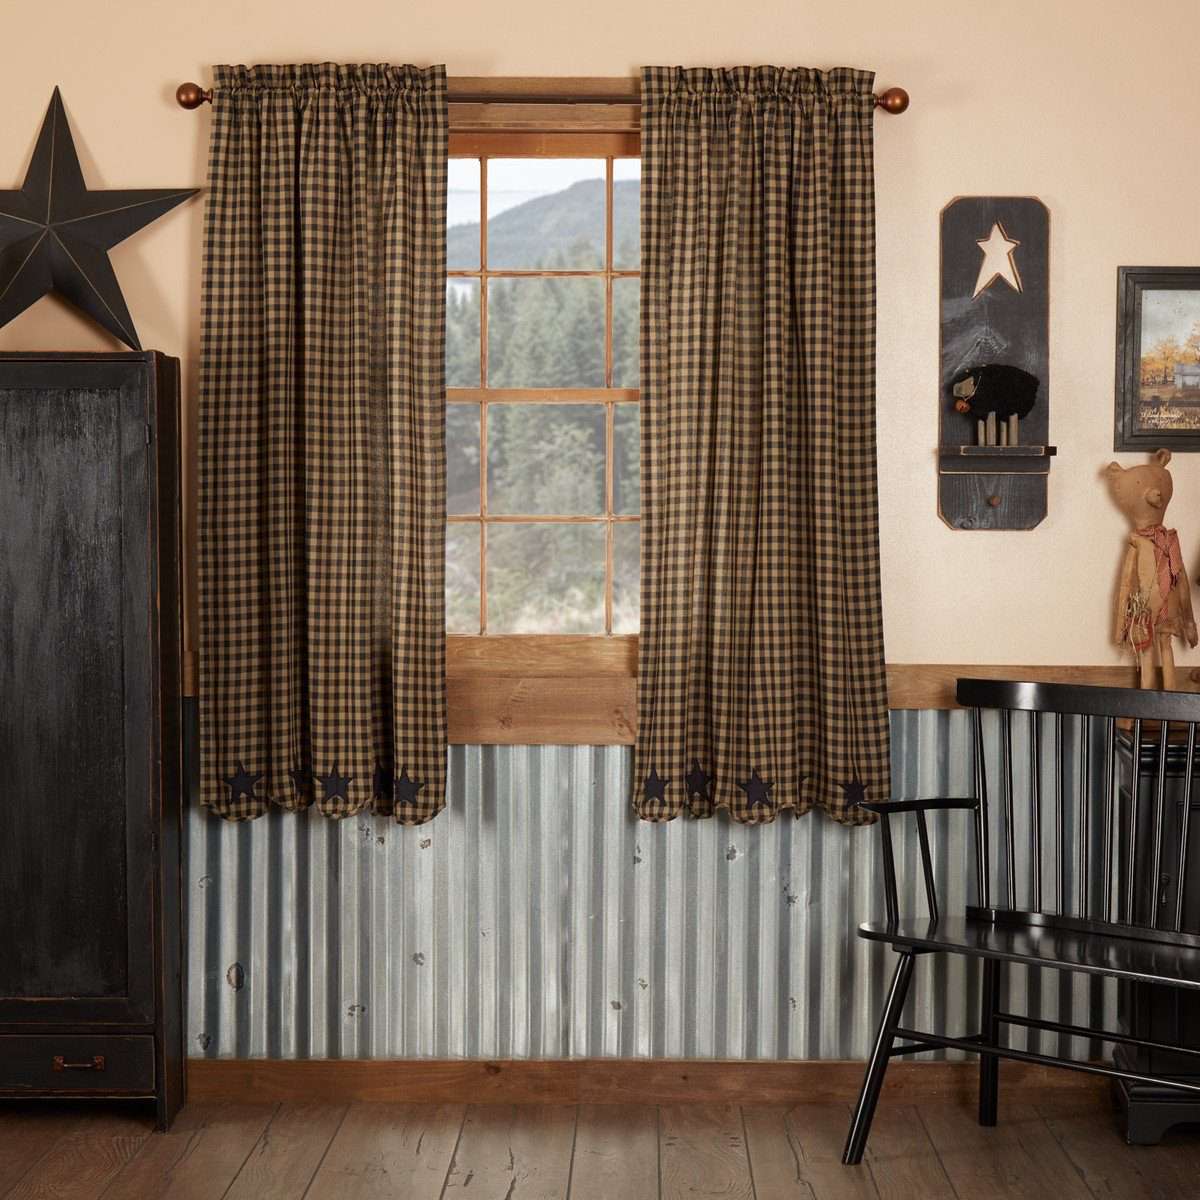 Black Star Scalloped Short Panel Country Curtain Set of 2 63x36 VHC Brands - The Fox Decor